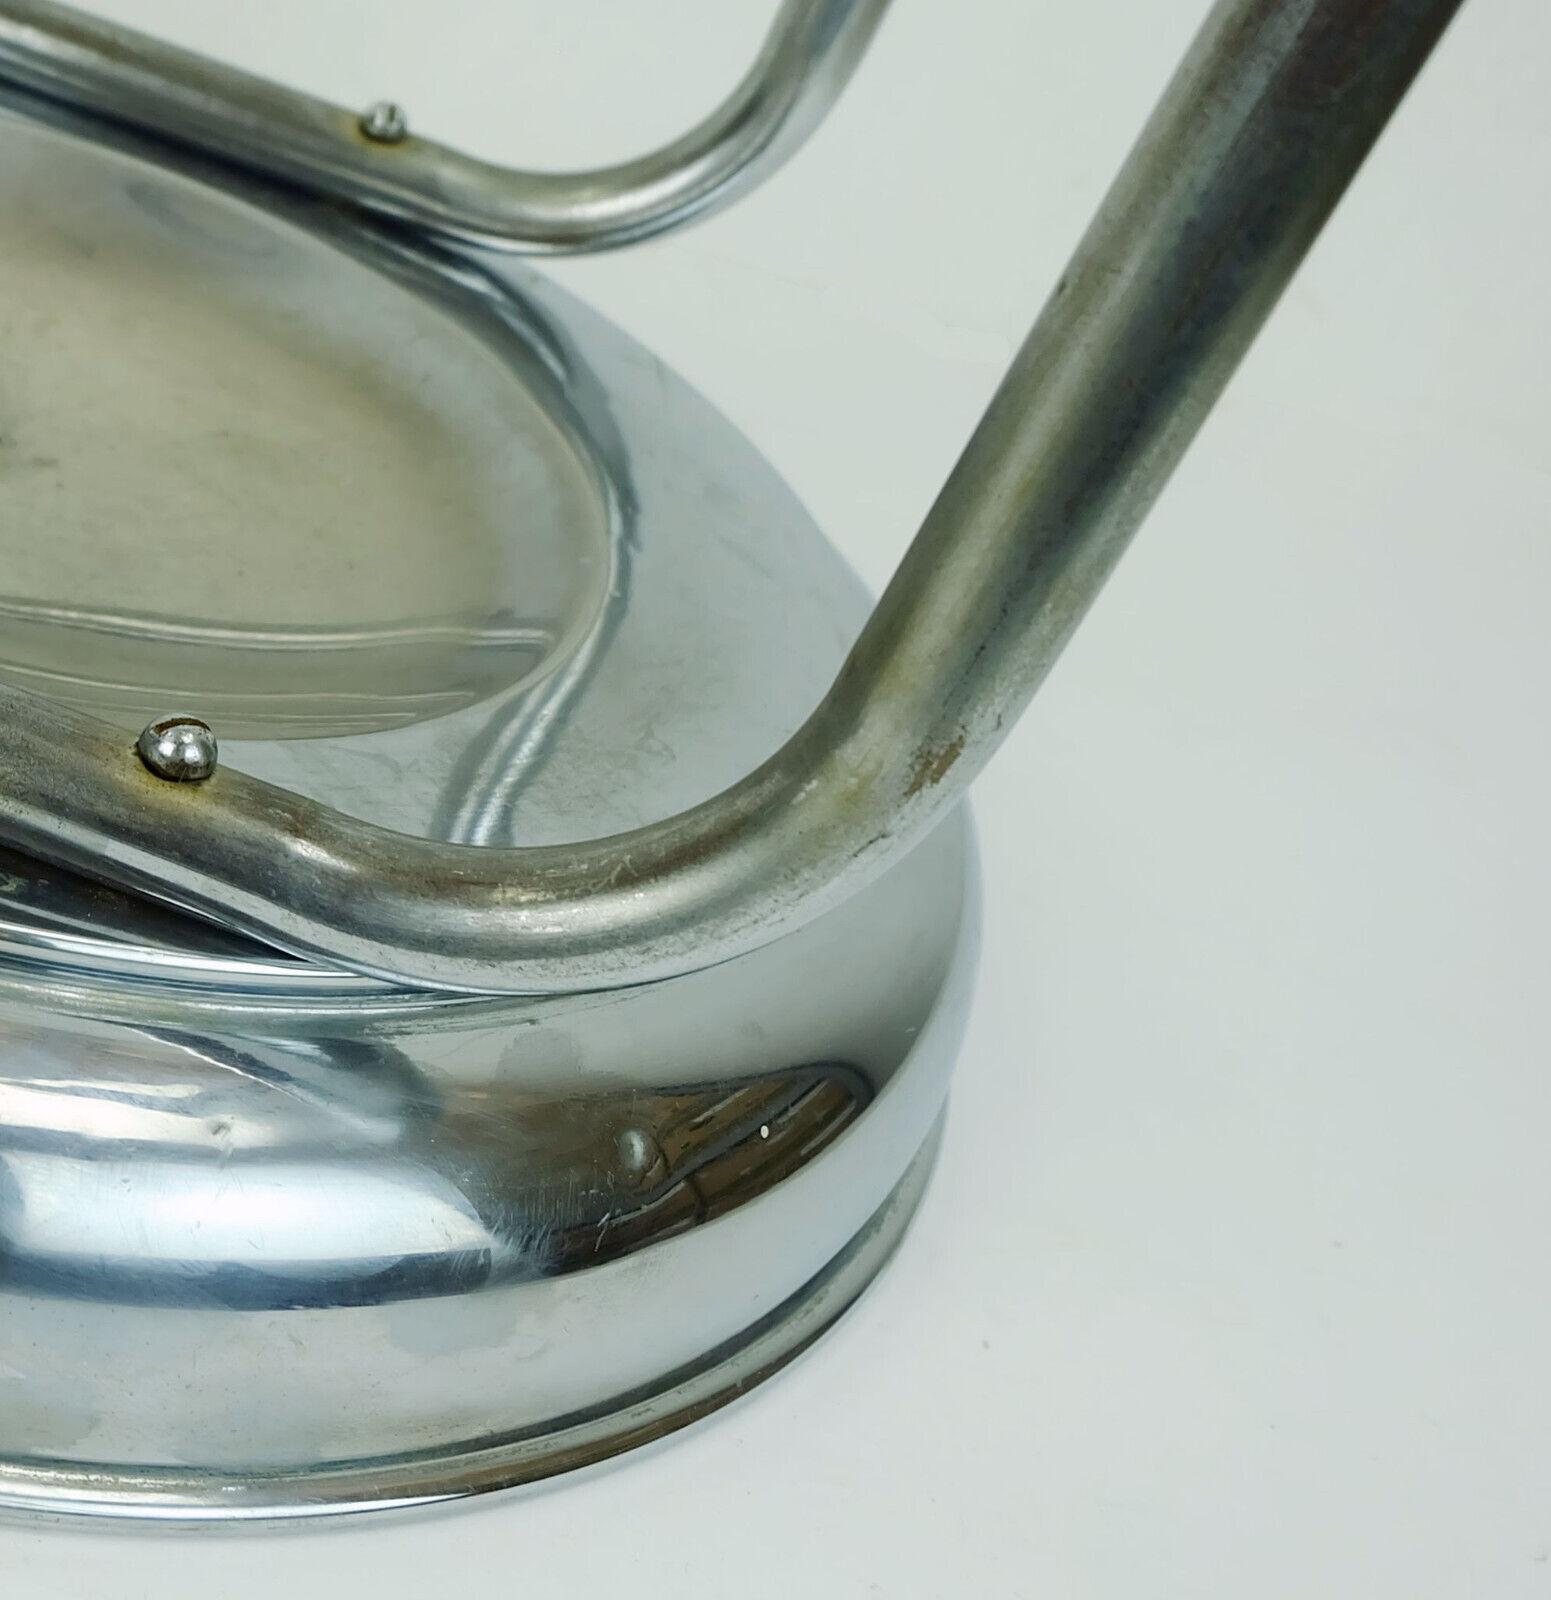 Umbrella stand from the 1930s. Origin Belgium or France. Made of chrome plated metal.

Dimensions in cm:
Height 49 cm, width 45 cm, diameter stand 31.5 cm.

Dimensions in inches:
Height 19.29